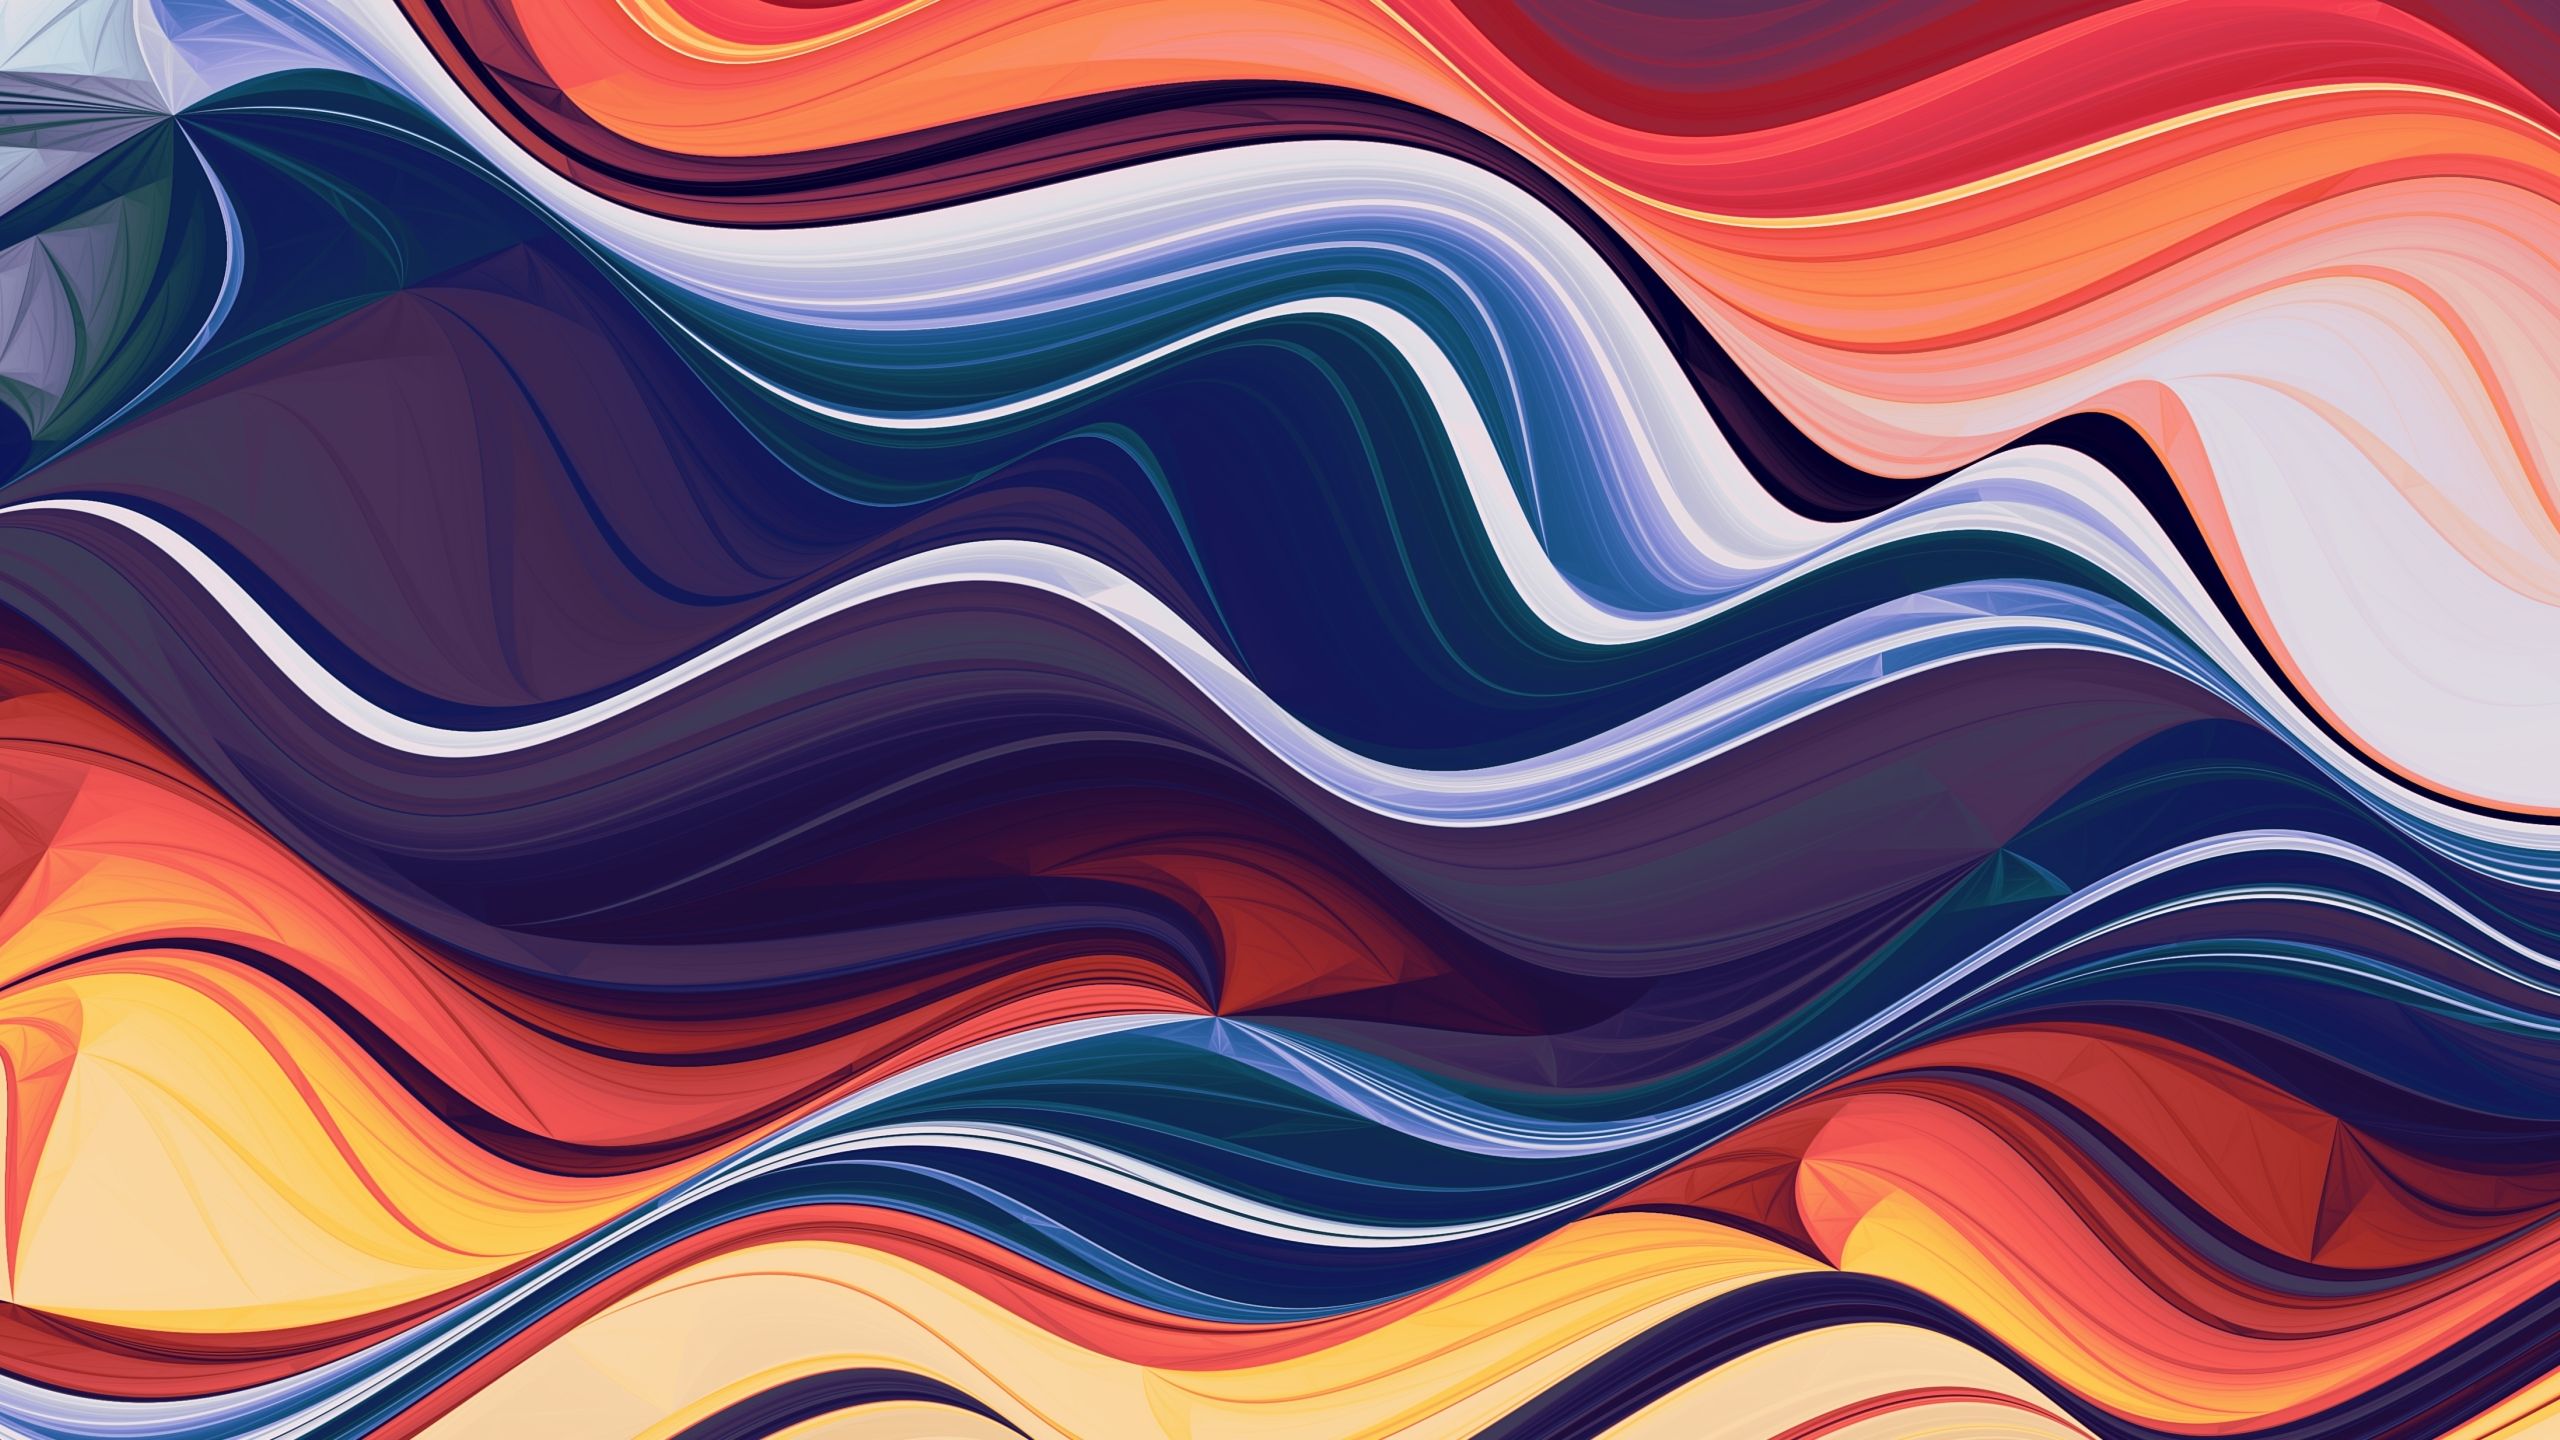 Wave Of Abstract Colors 1440P Resolution Wallpaper, HD Abstract 4K Wallpaper, Image, Photo and Background